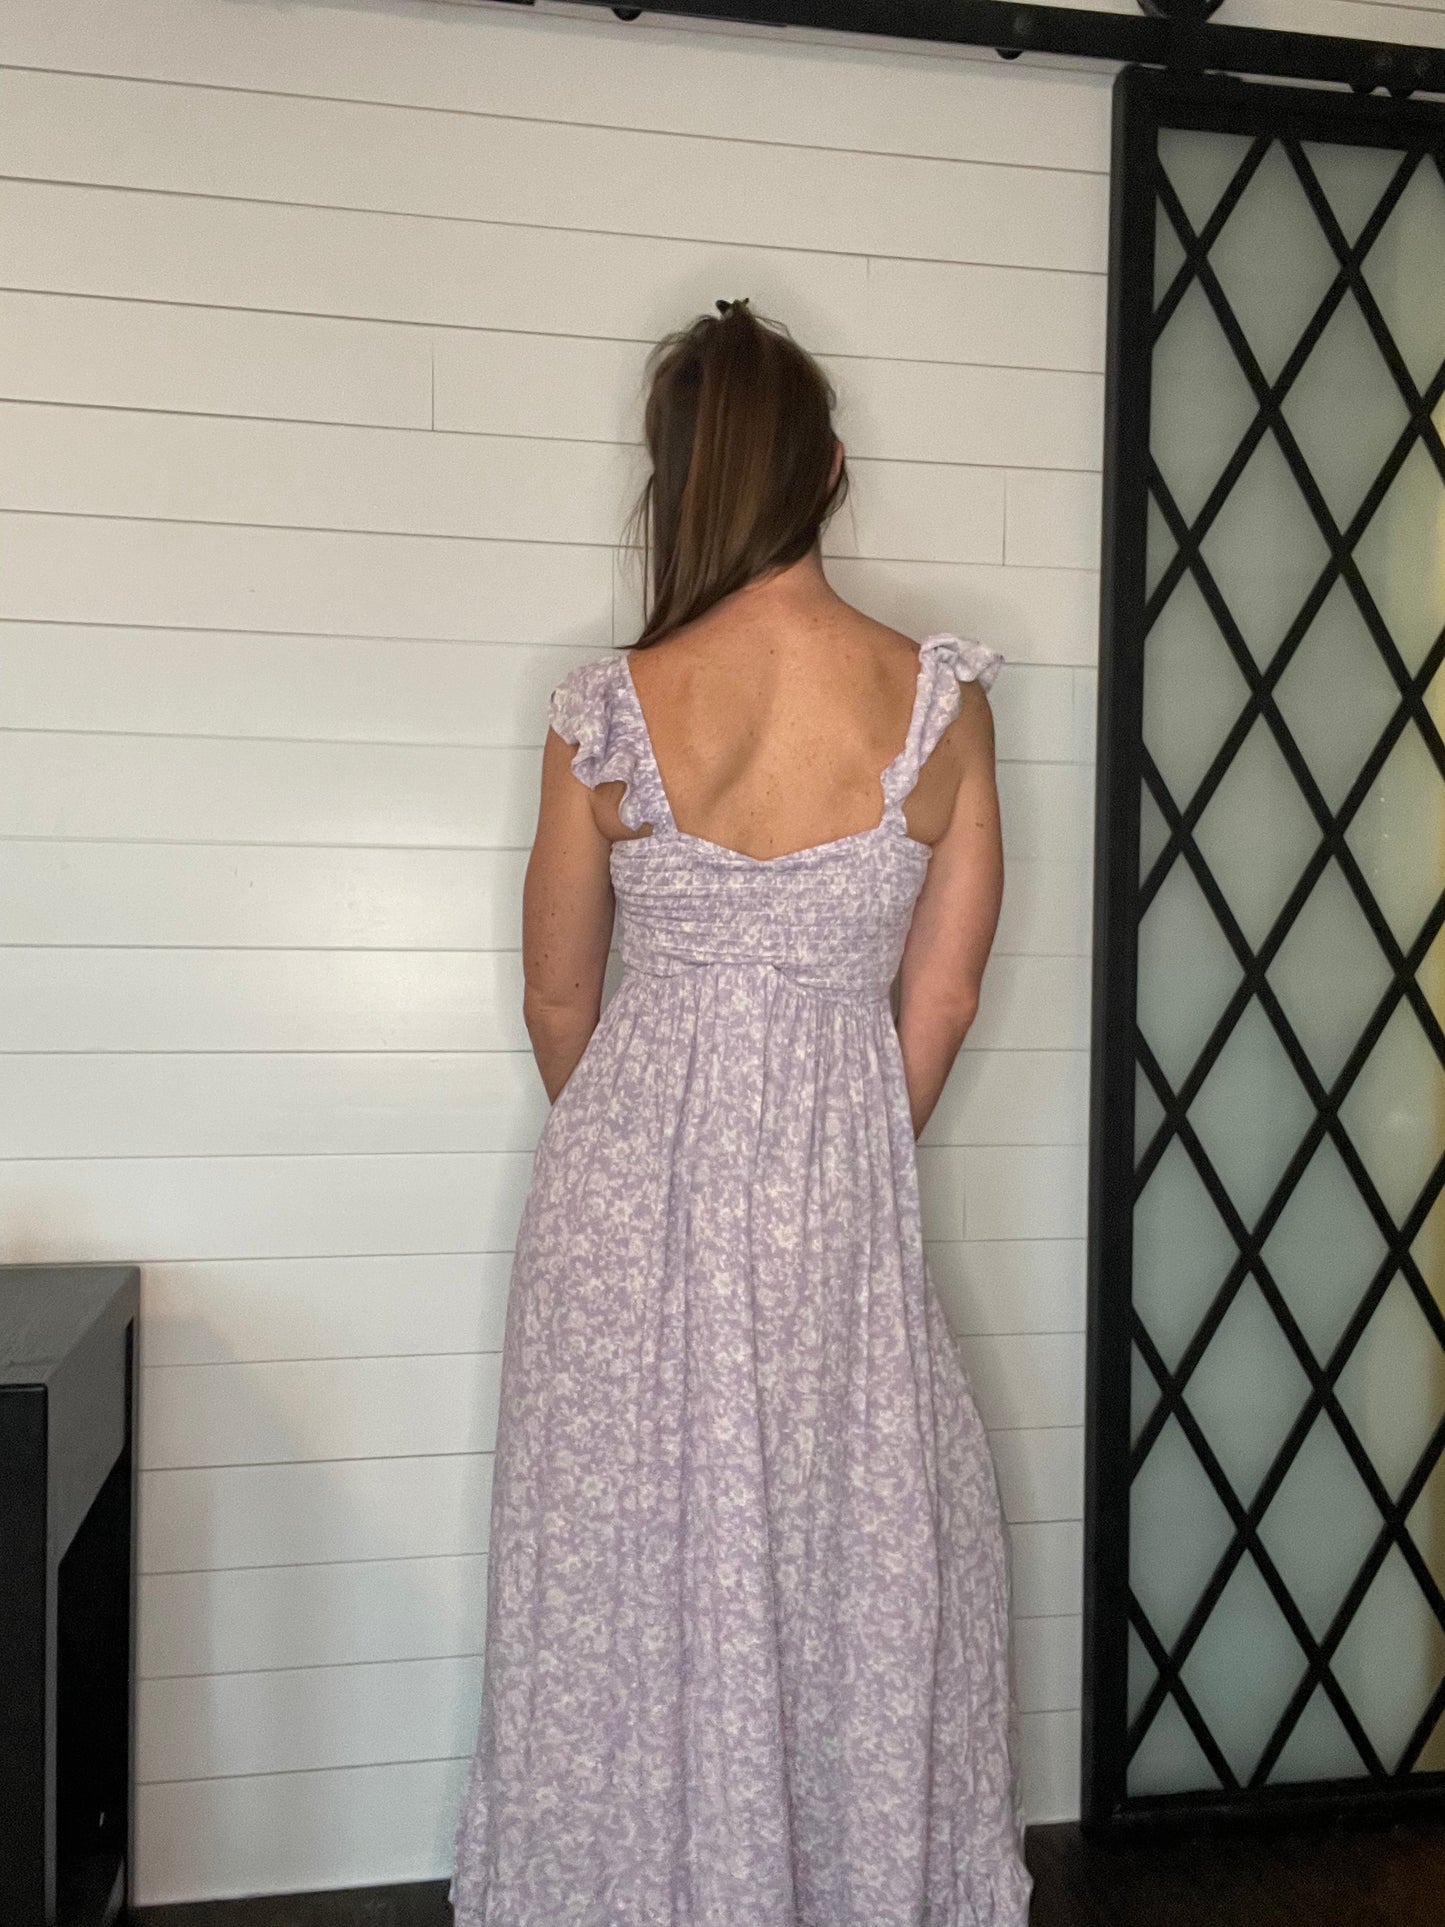 Lavender or sage Ruffle High-Low Maxi Dress